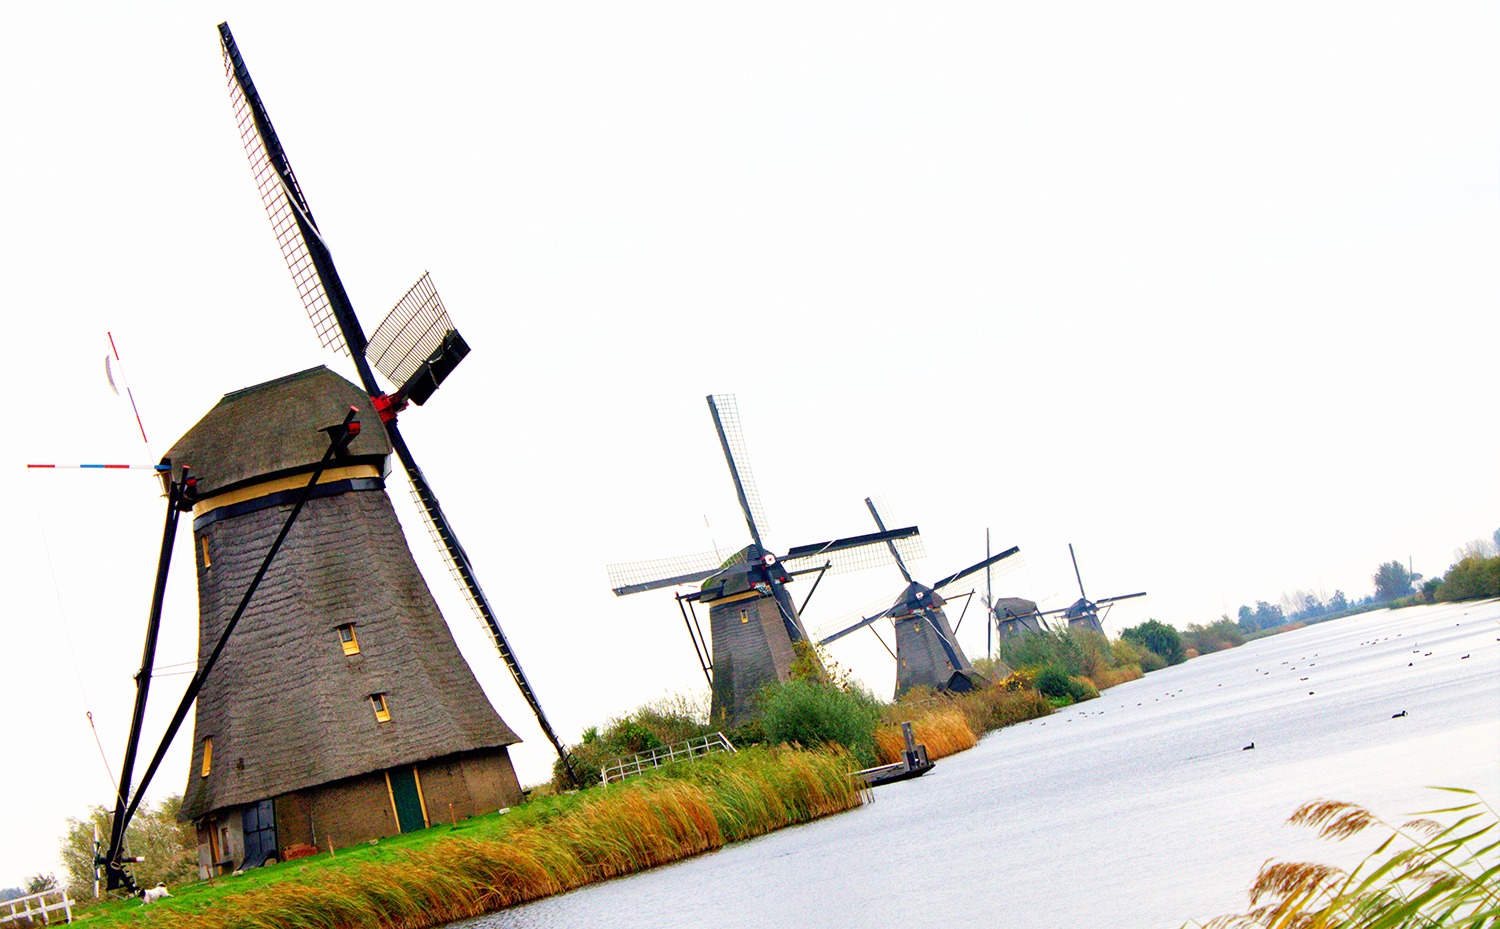 day trips from Rotterdam